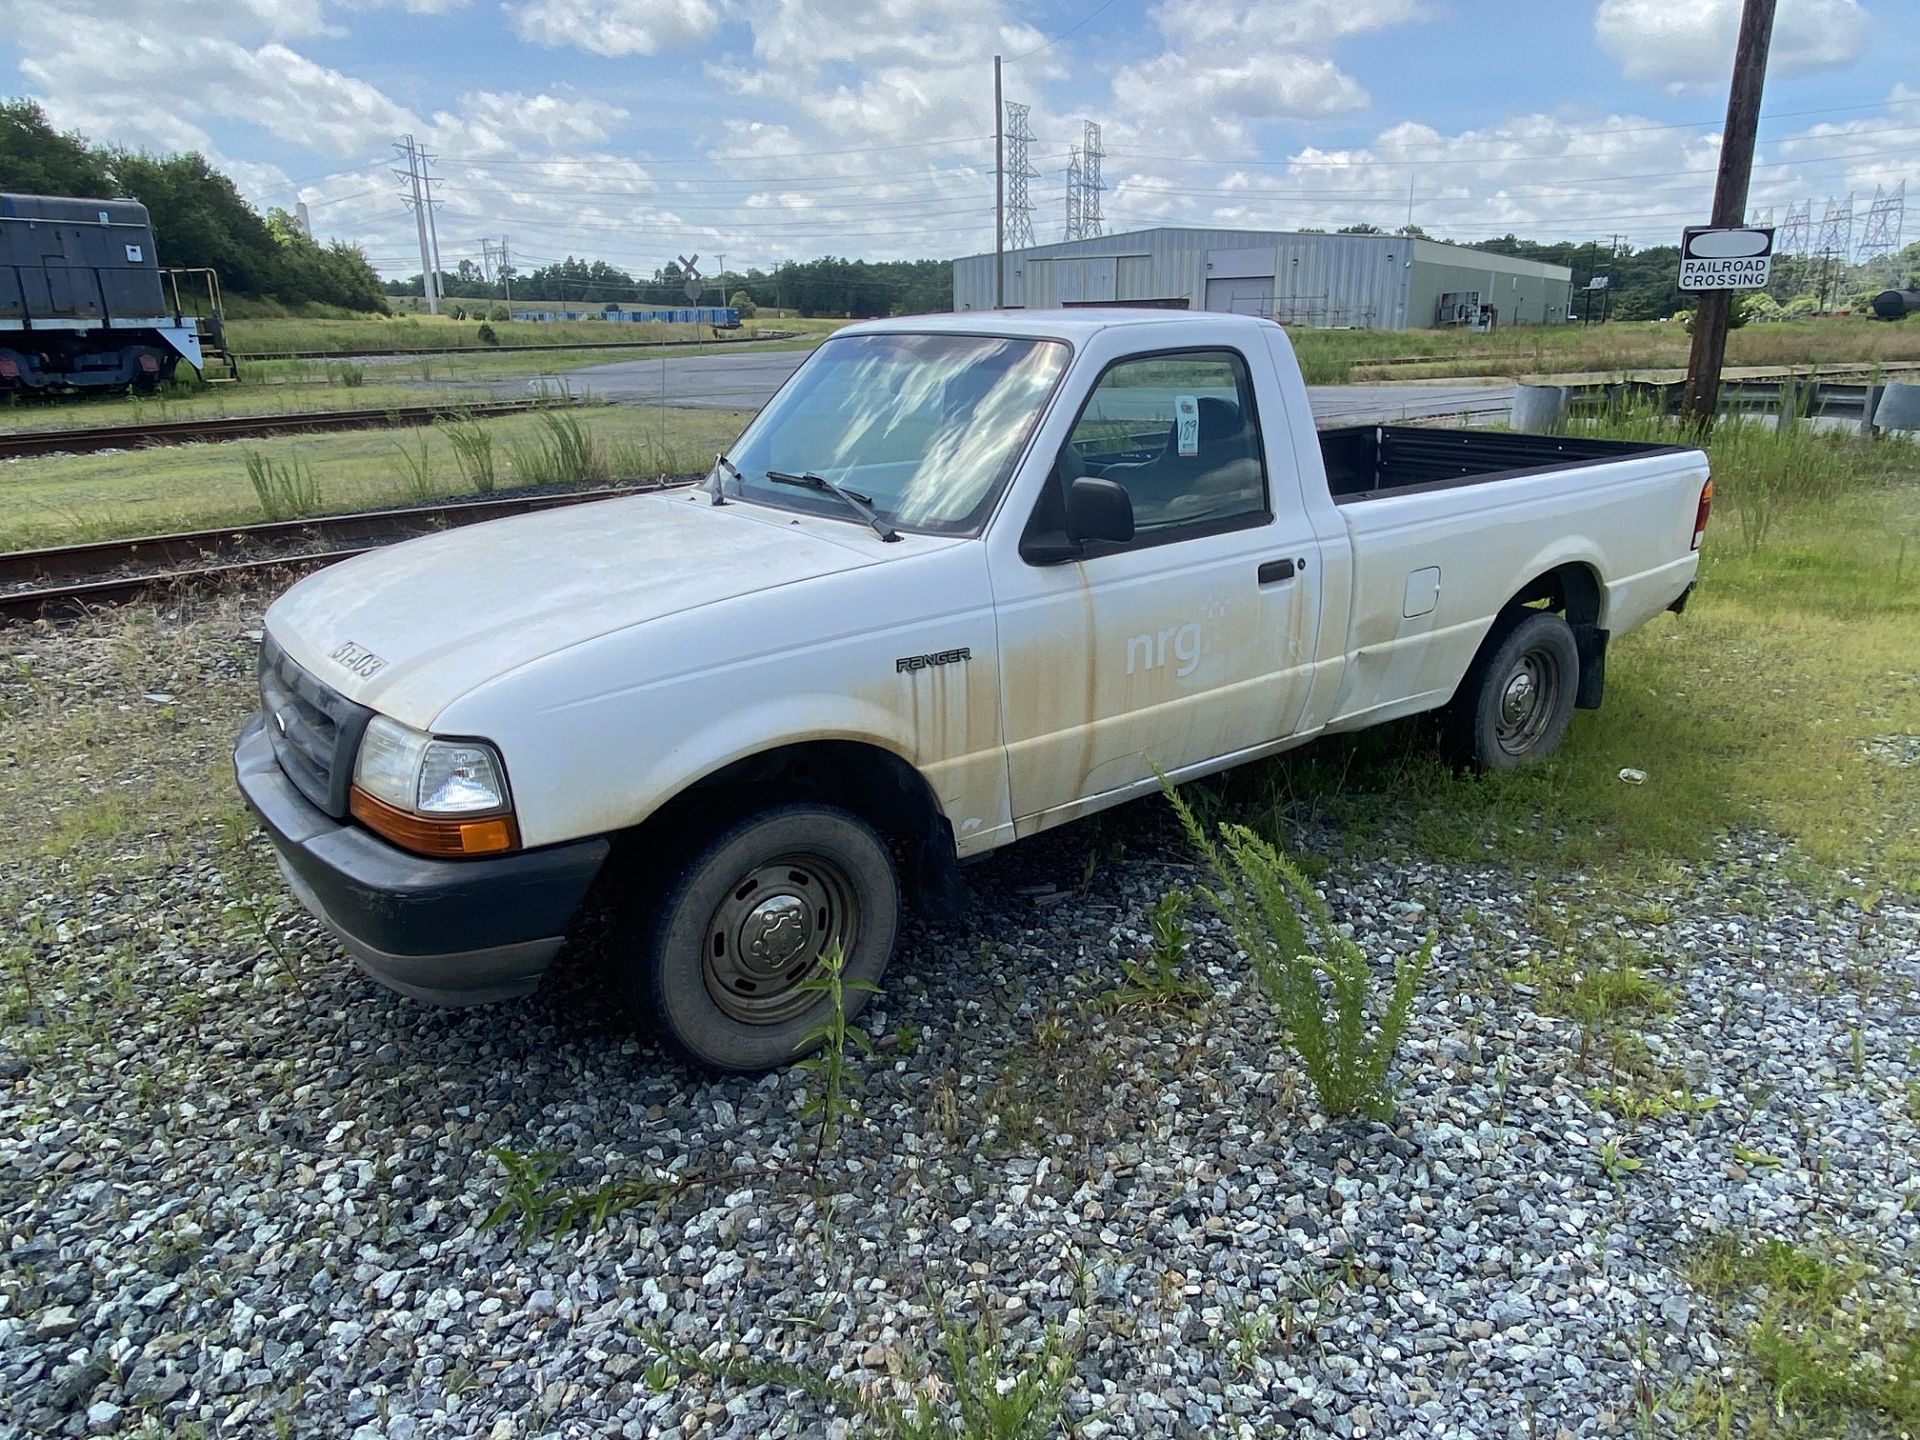 1998 FORD RANGER, AUTOMATIC, 100,341 MILES, VIN: 1FT7R10C8WTA66828, W/ TITLE (LOCATION: CY ROAD)